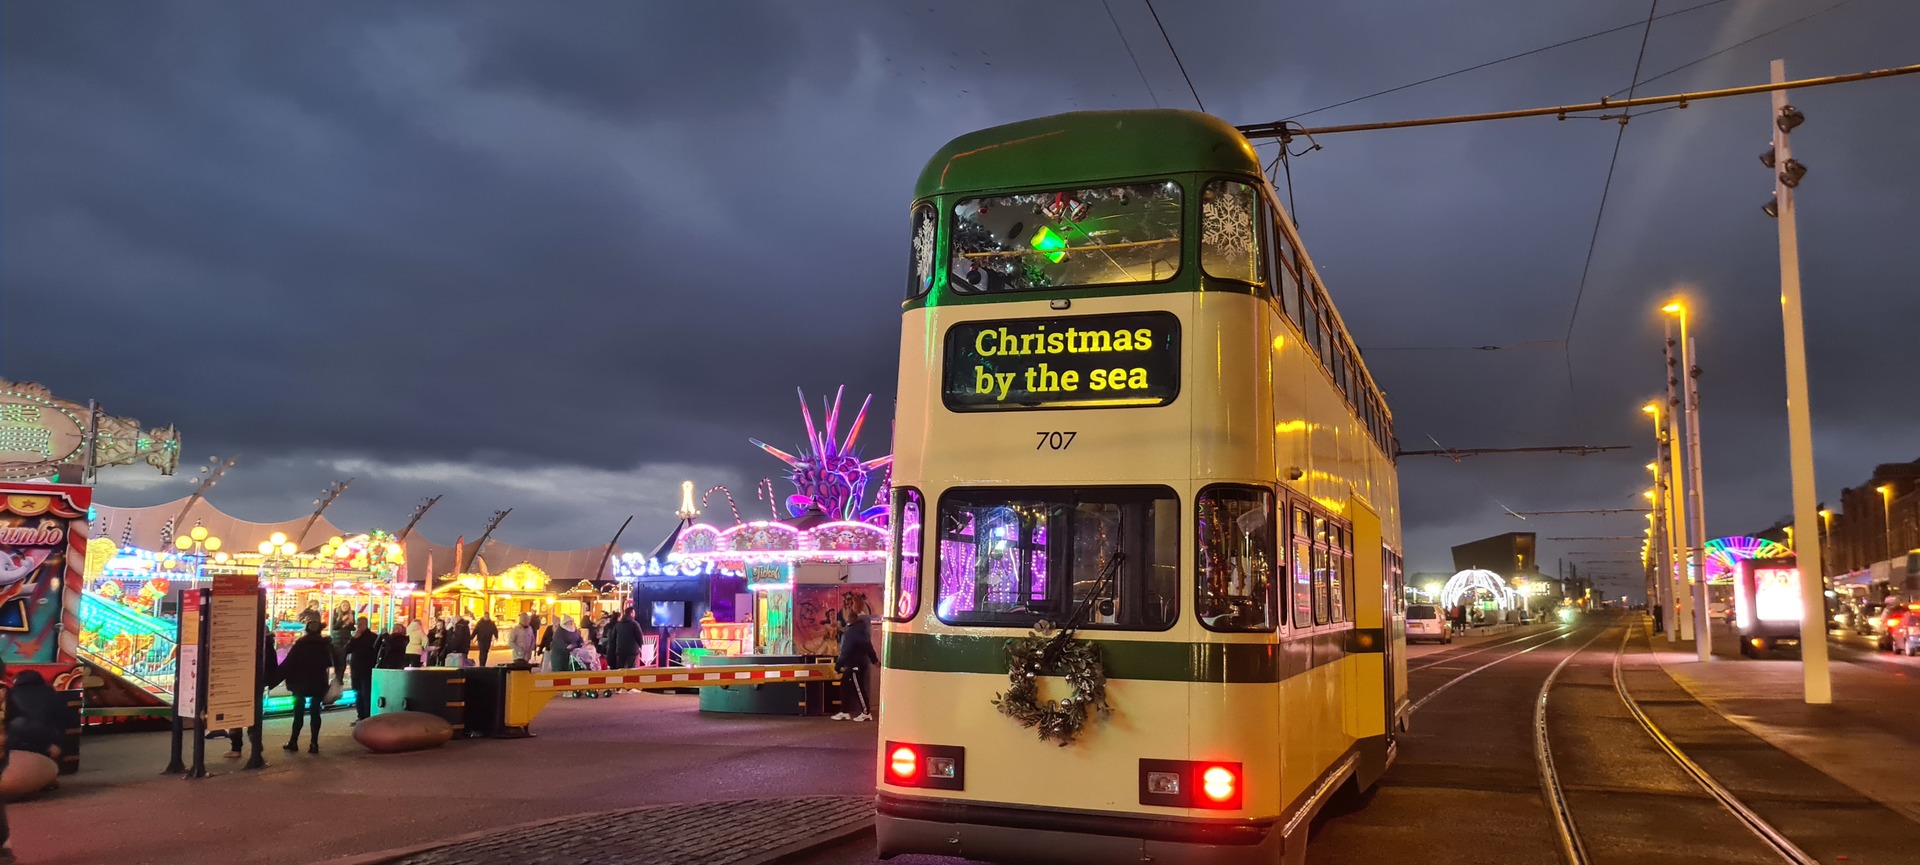 Blackpool Heritage Tram Tours is delighted to announce the launch of its Mini Festive Tours